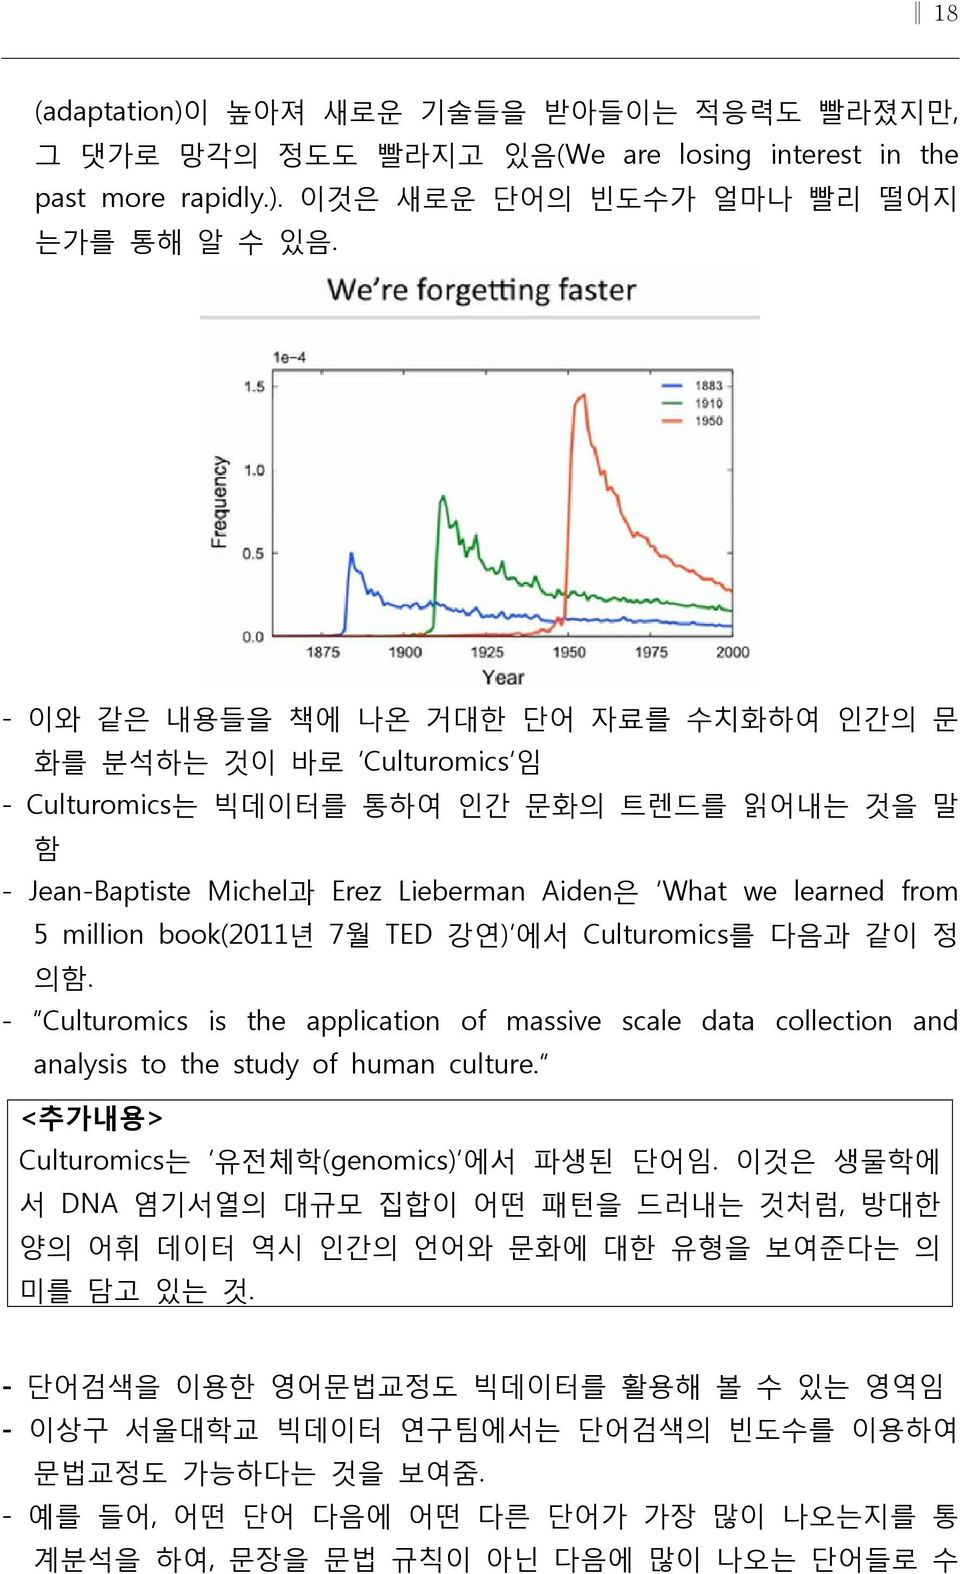 book(2011년 7월 TED 강연) 에서 Culturomics를 다음과 같이 정 의함. - Culturomics is the application of massive scale data collection and analysis to the study of human culture.